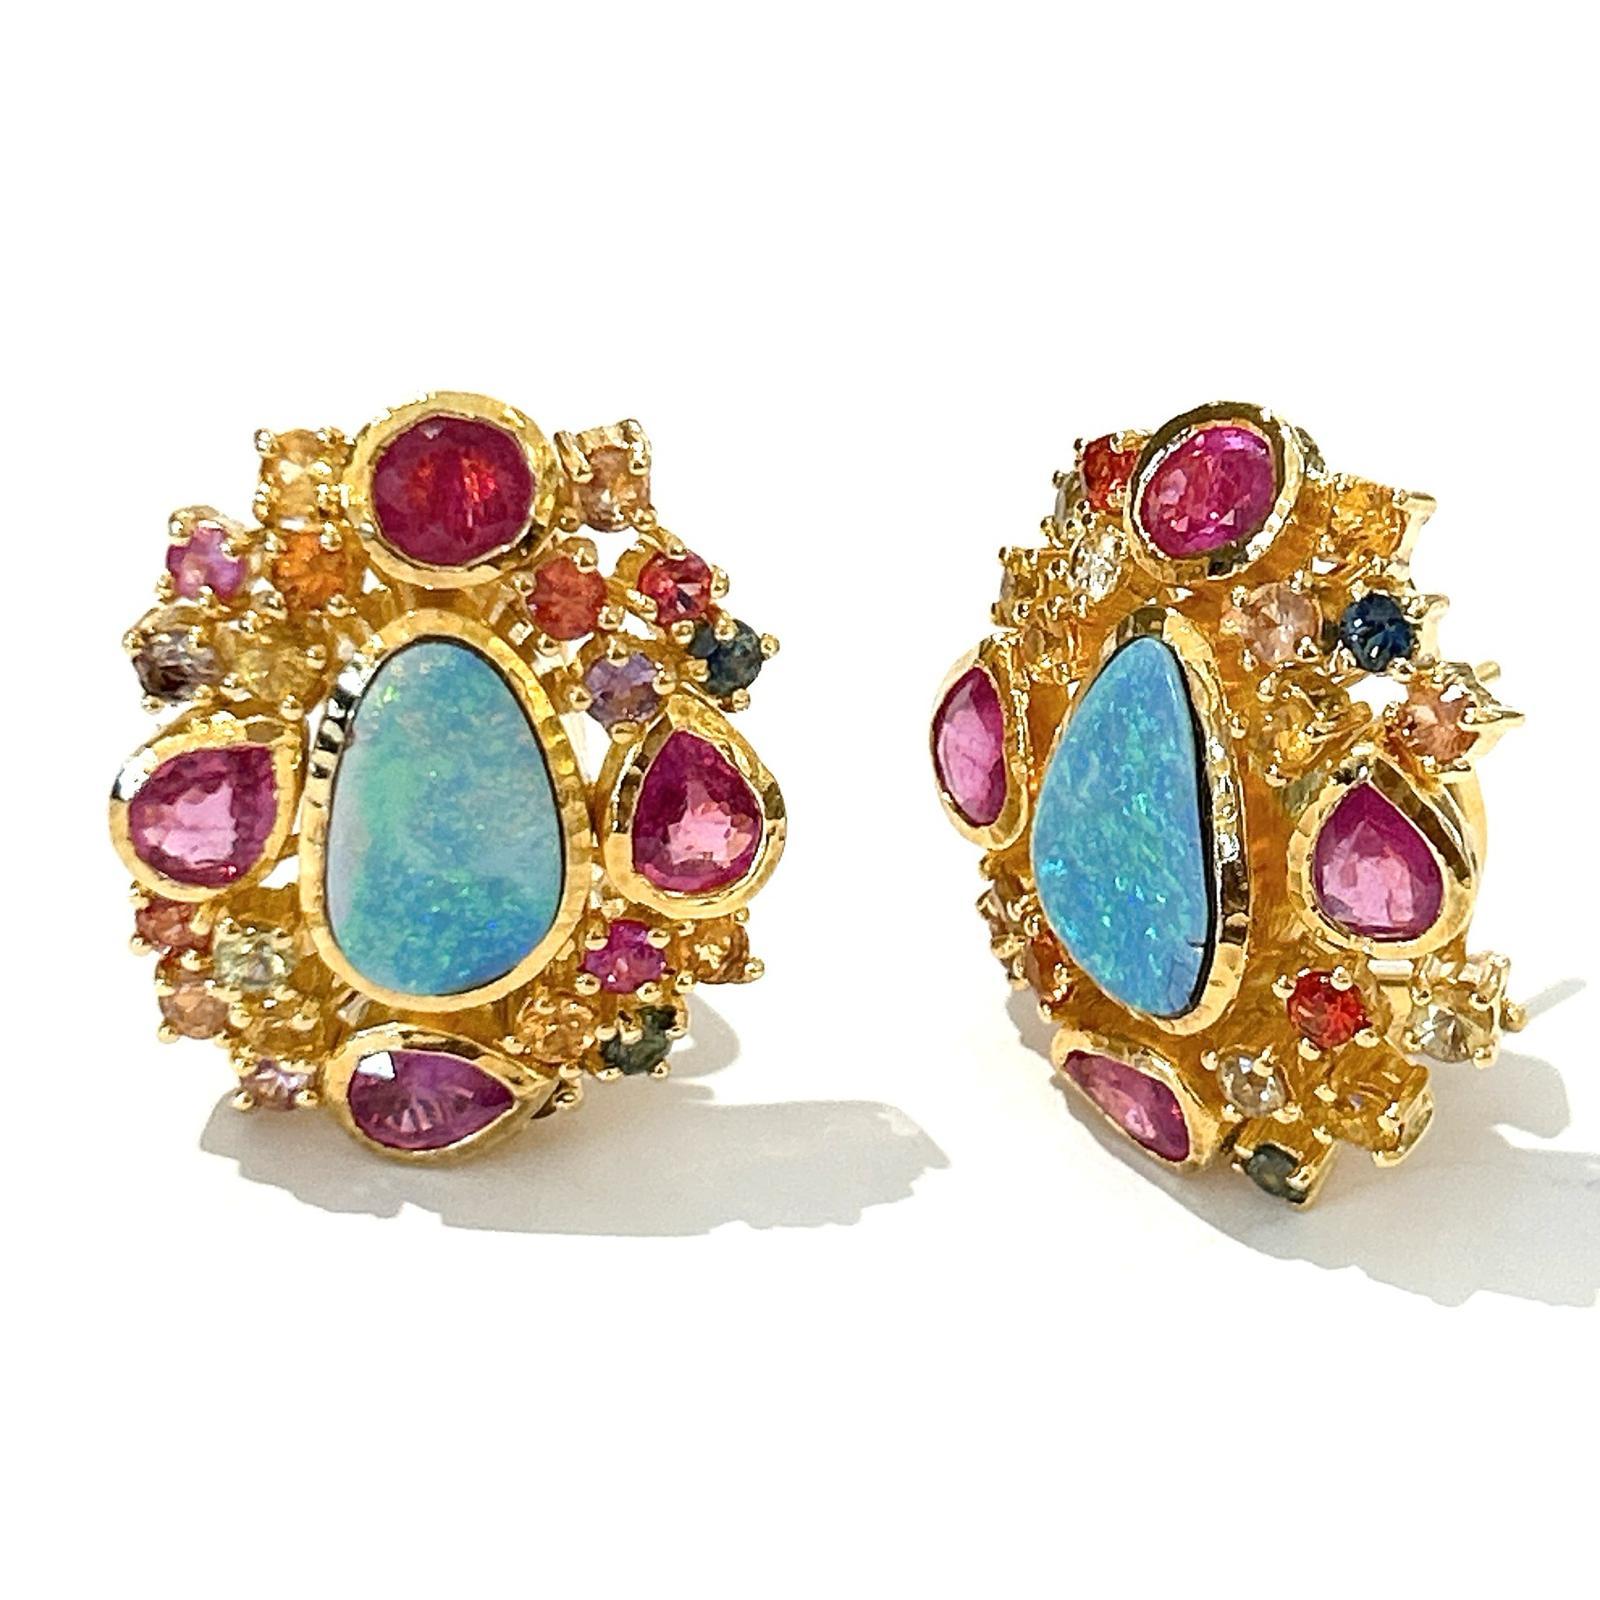 Bochic “Orient” Opal, Ruby, Sapphire & Multi Gem Earrings Set 18K Gold&Silver 

Natural Rubies - 8 carat  
Natural Multi Sapphires - 5 carat
Natural Blue Opal- 1.50 carat 


The earrings from the 